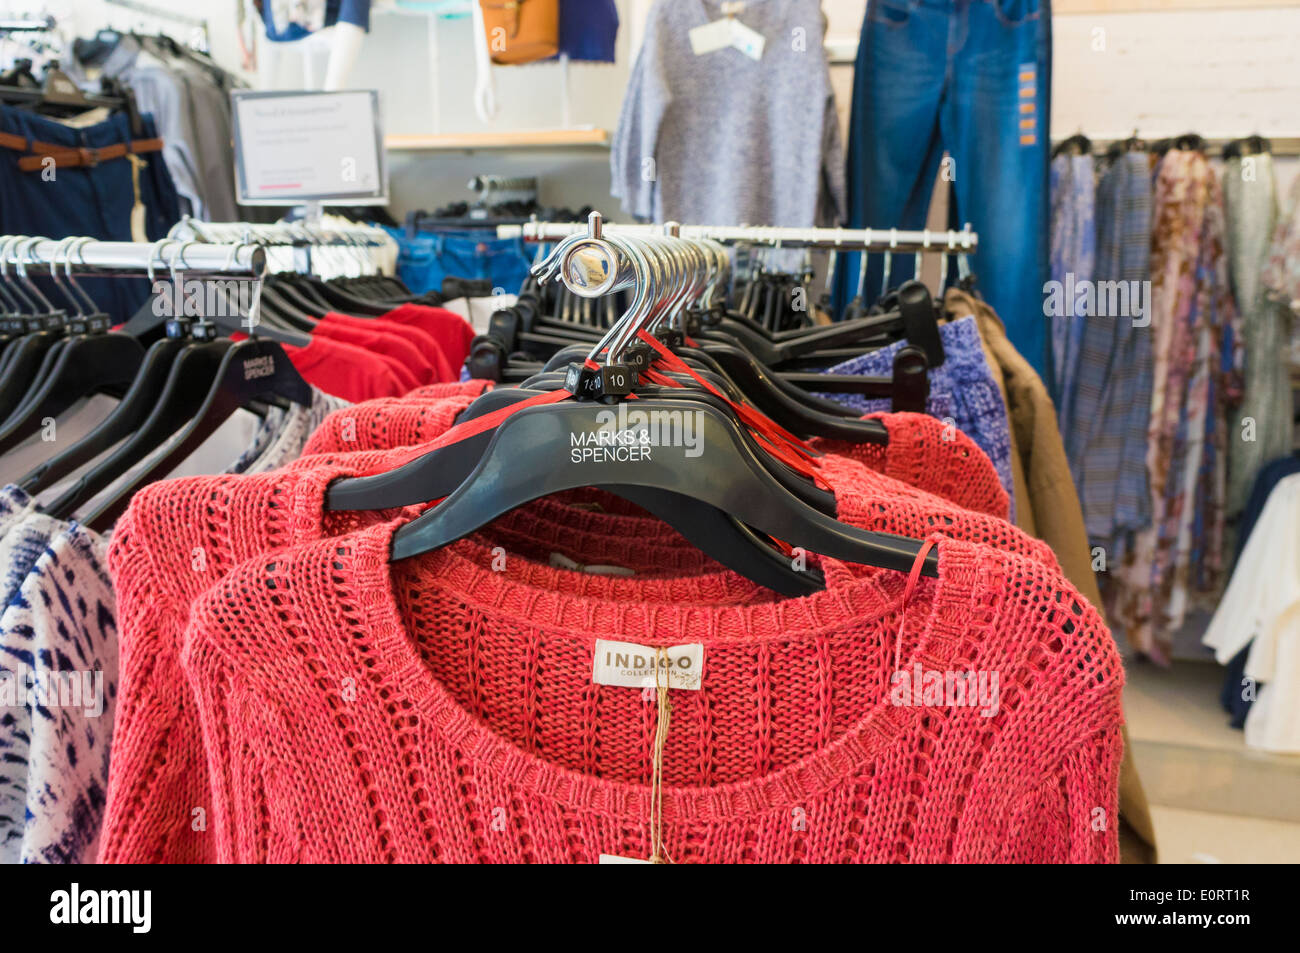 Marks and Spencer - M&S - clothing displays inside the store, England, UK  Stock Photo - Alamy